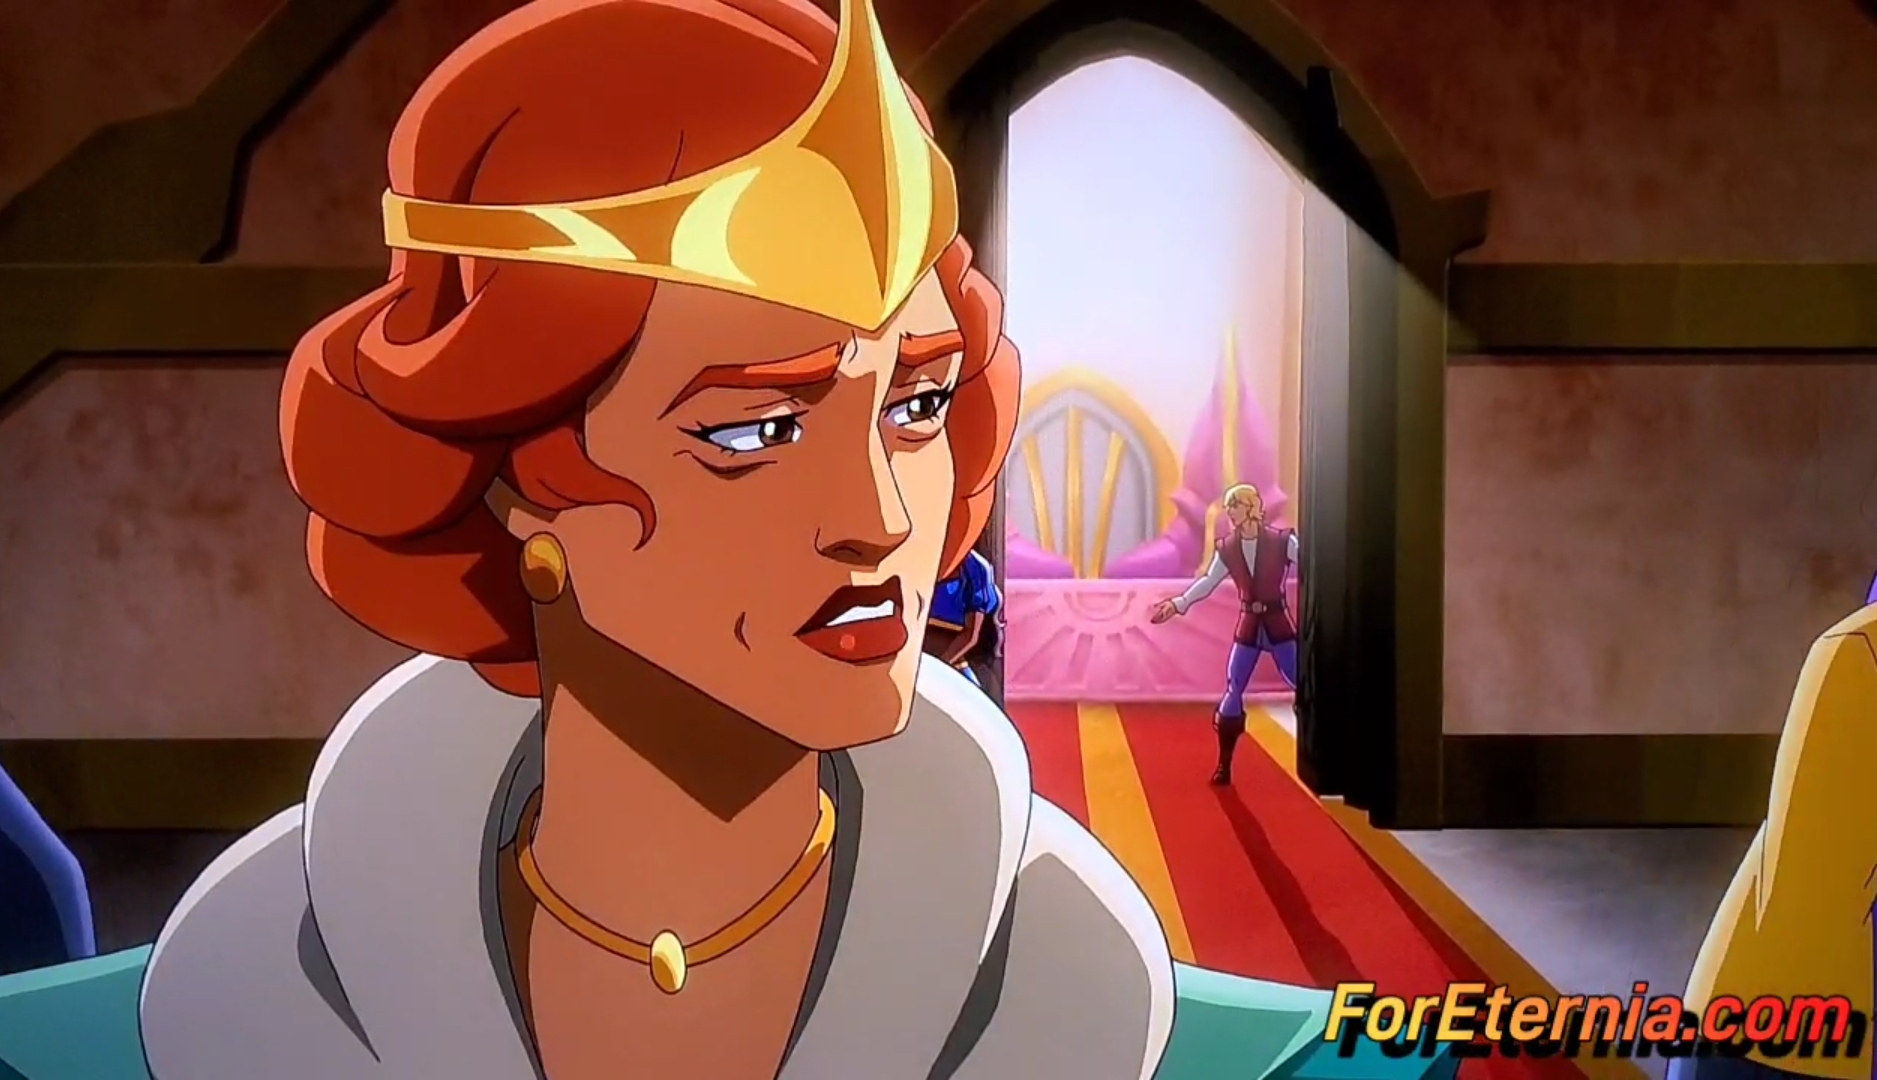 Since when did Queen Marlena know Adam was He-Man in ”Masters of the Universe: Revelation”?